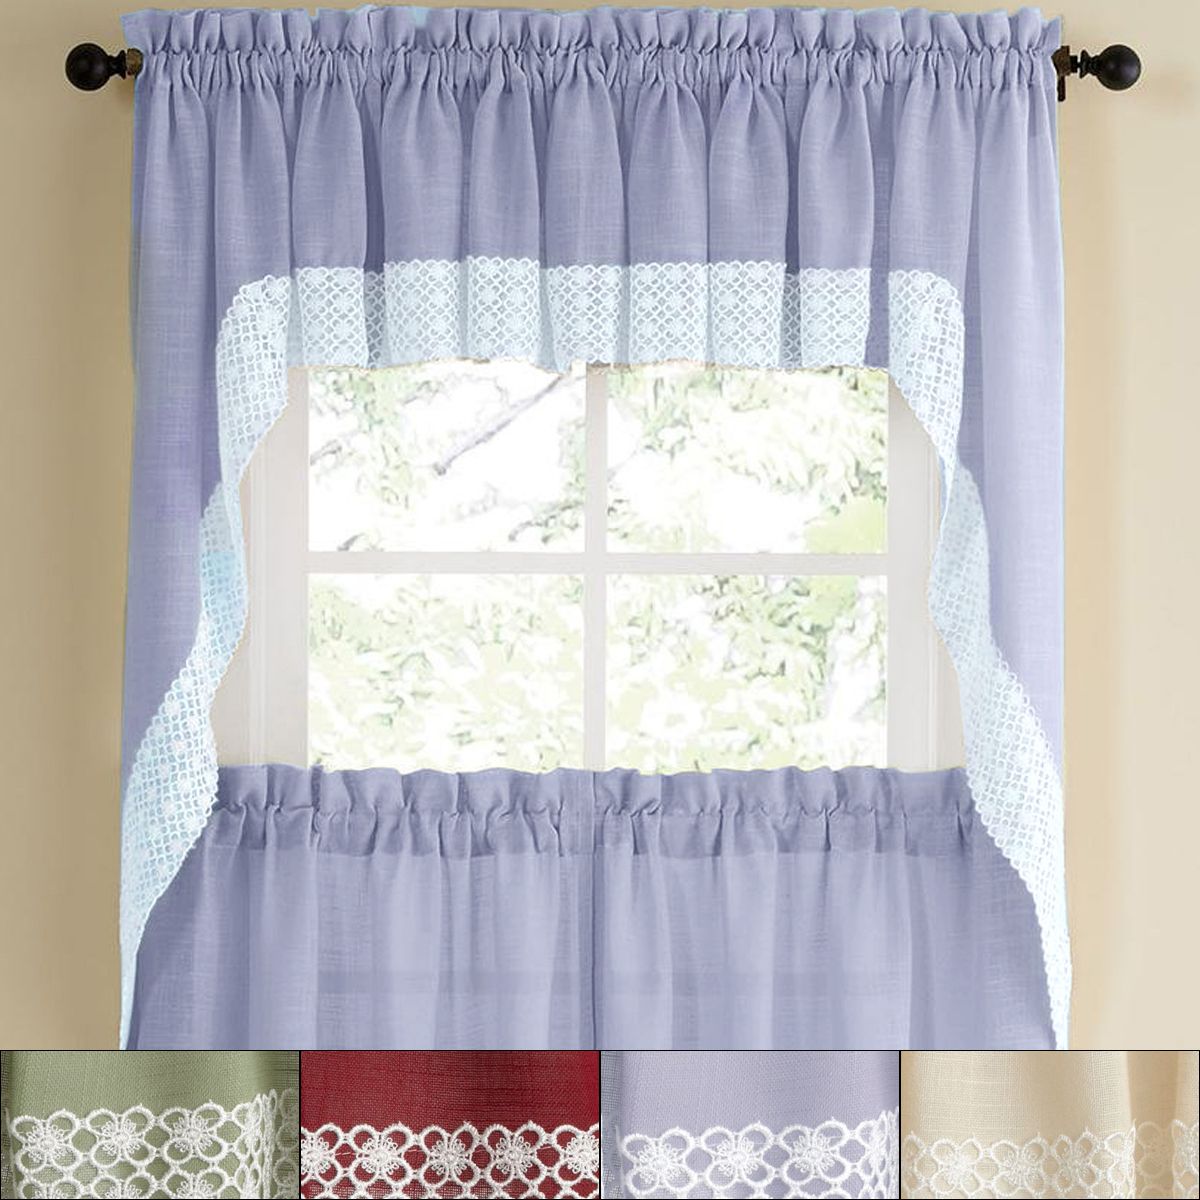 Details About Salem Kitchen Window Curtain W/ Lace Trim – 38" Swag Pair With Regard To Ivory Knit Lace Bird Motif Window Curtain (View 17 of 20)